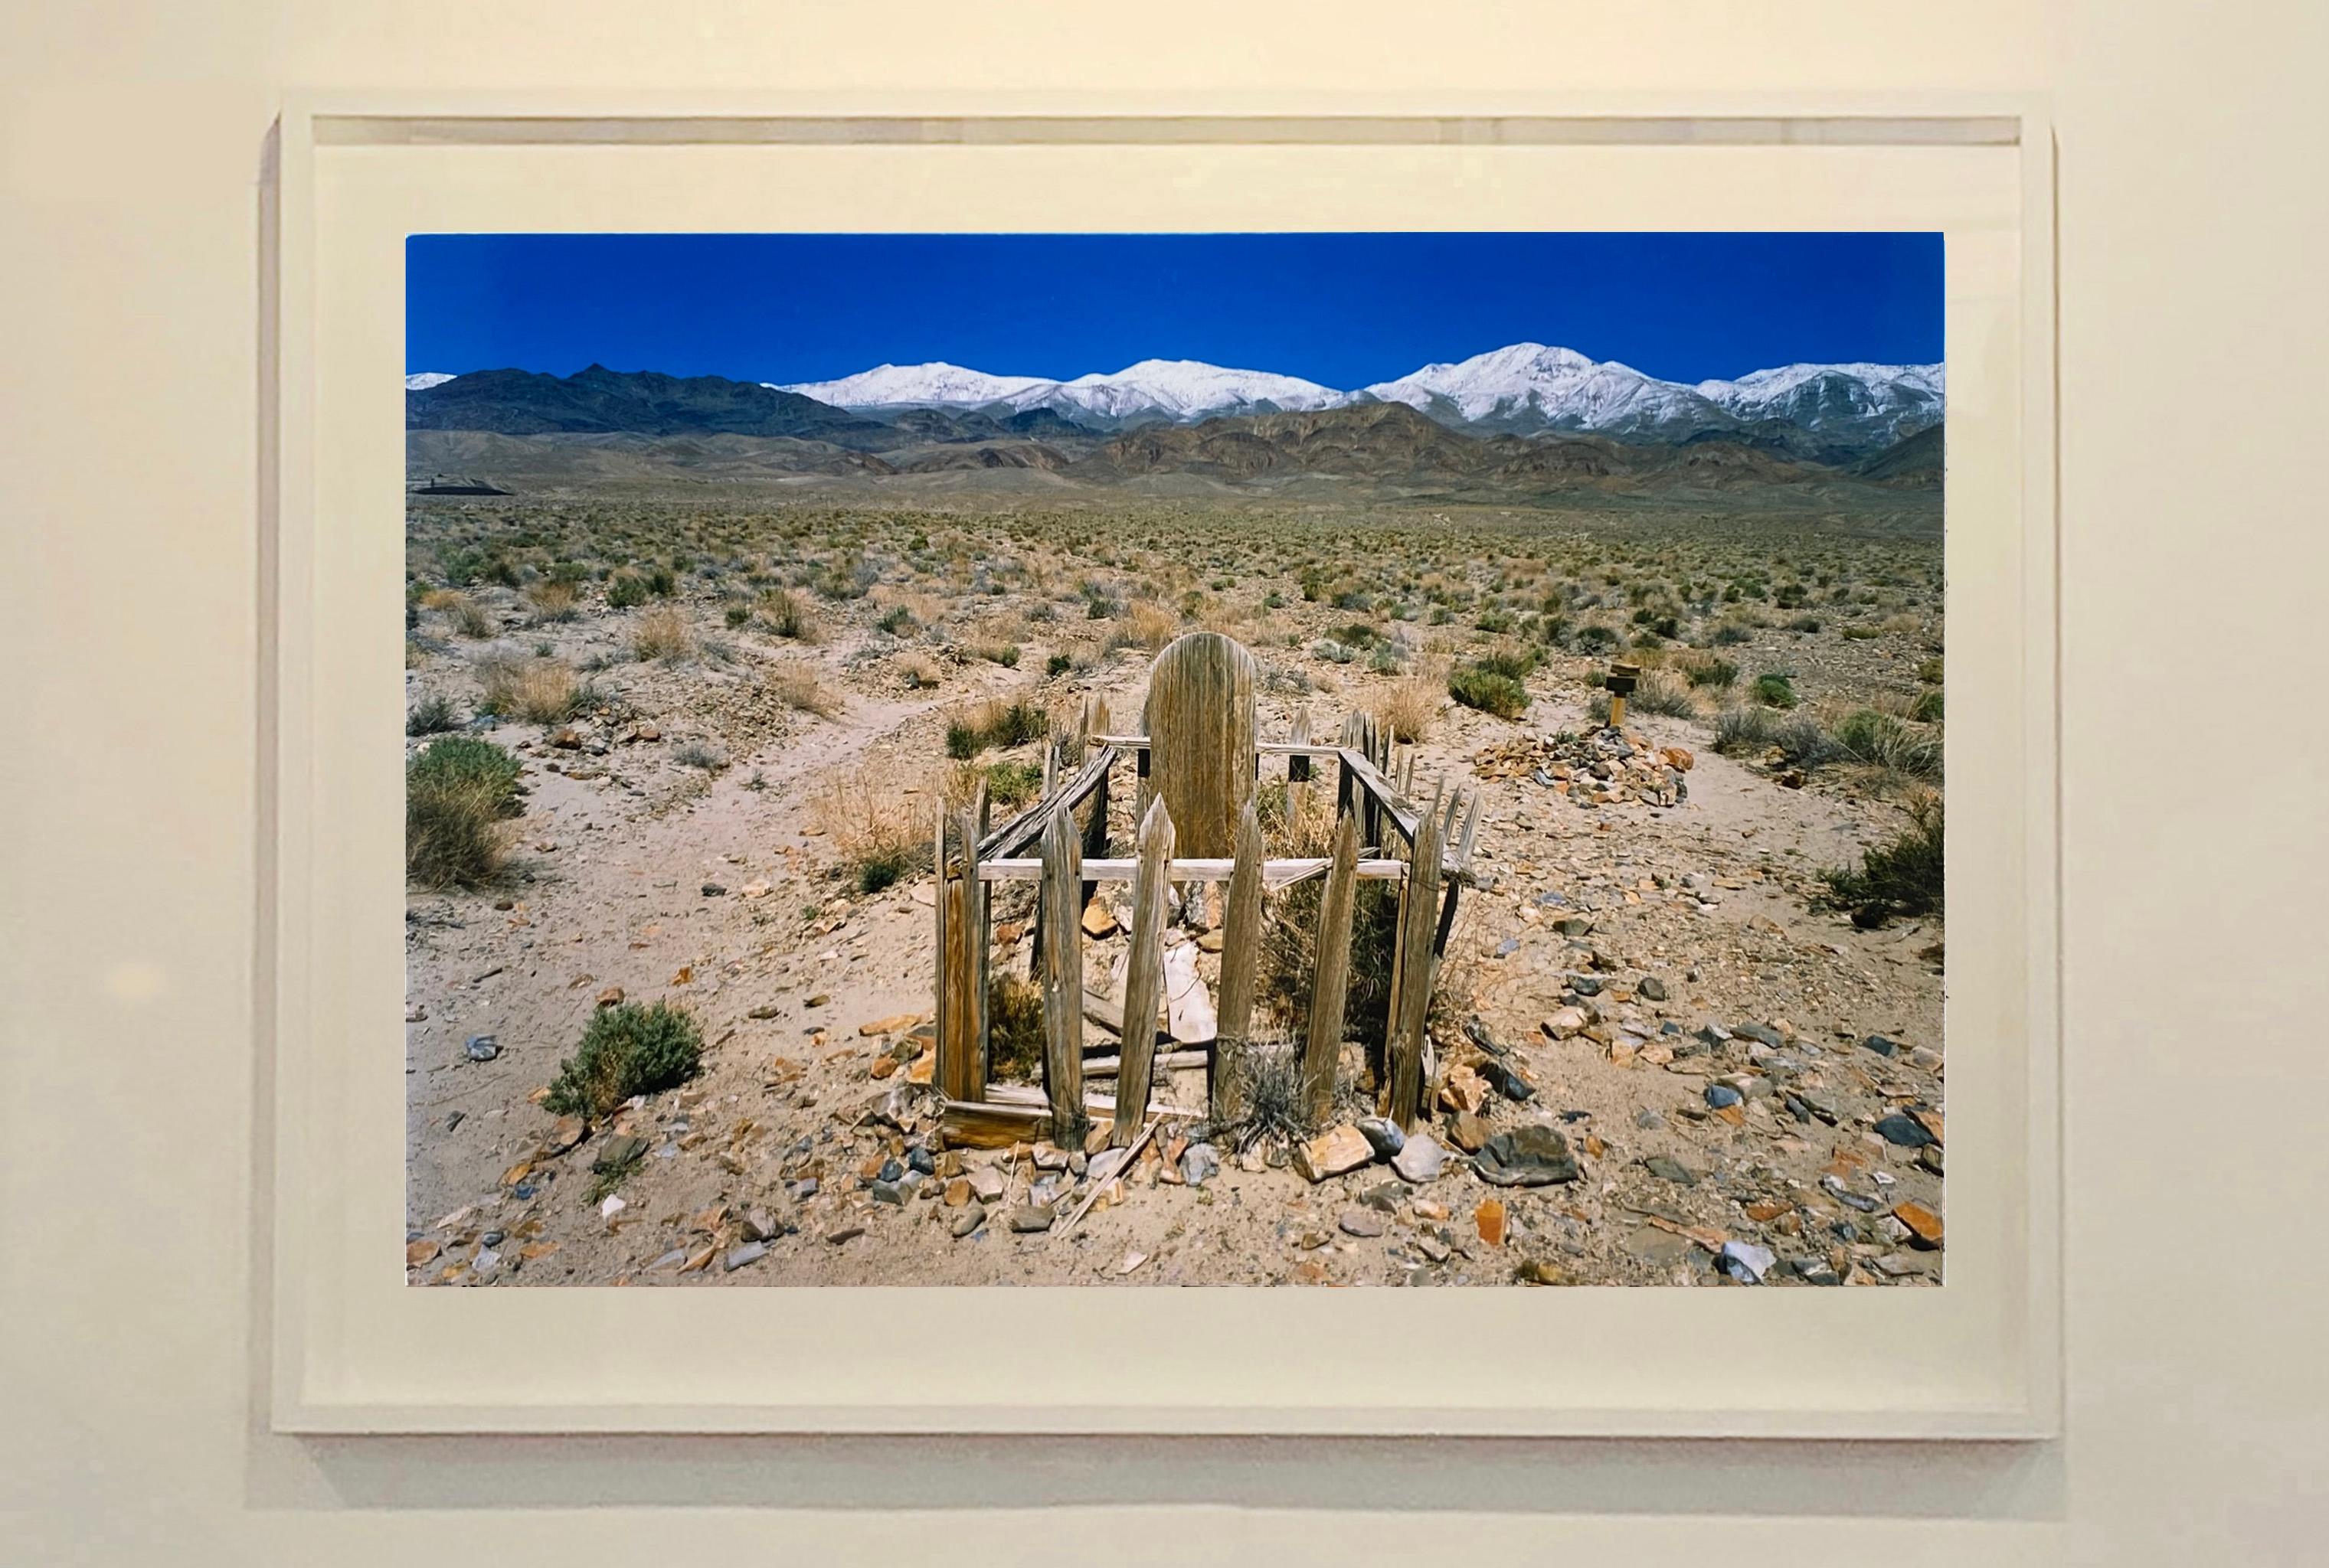 Pioneer's Grave II, Keeler, Inyo County, California - American Landscape Photo - Brown Color Photograph by Richard Heeps